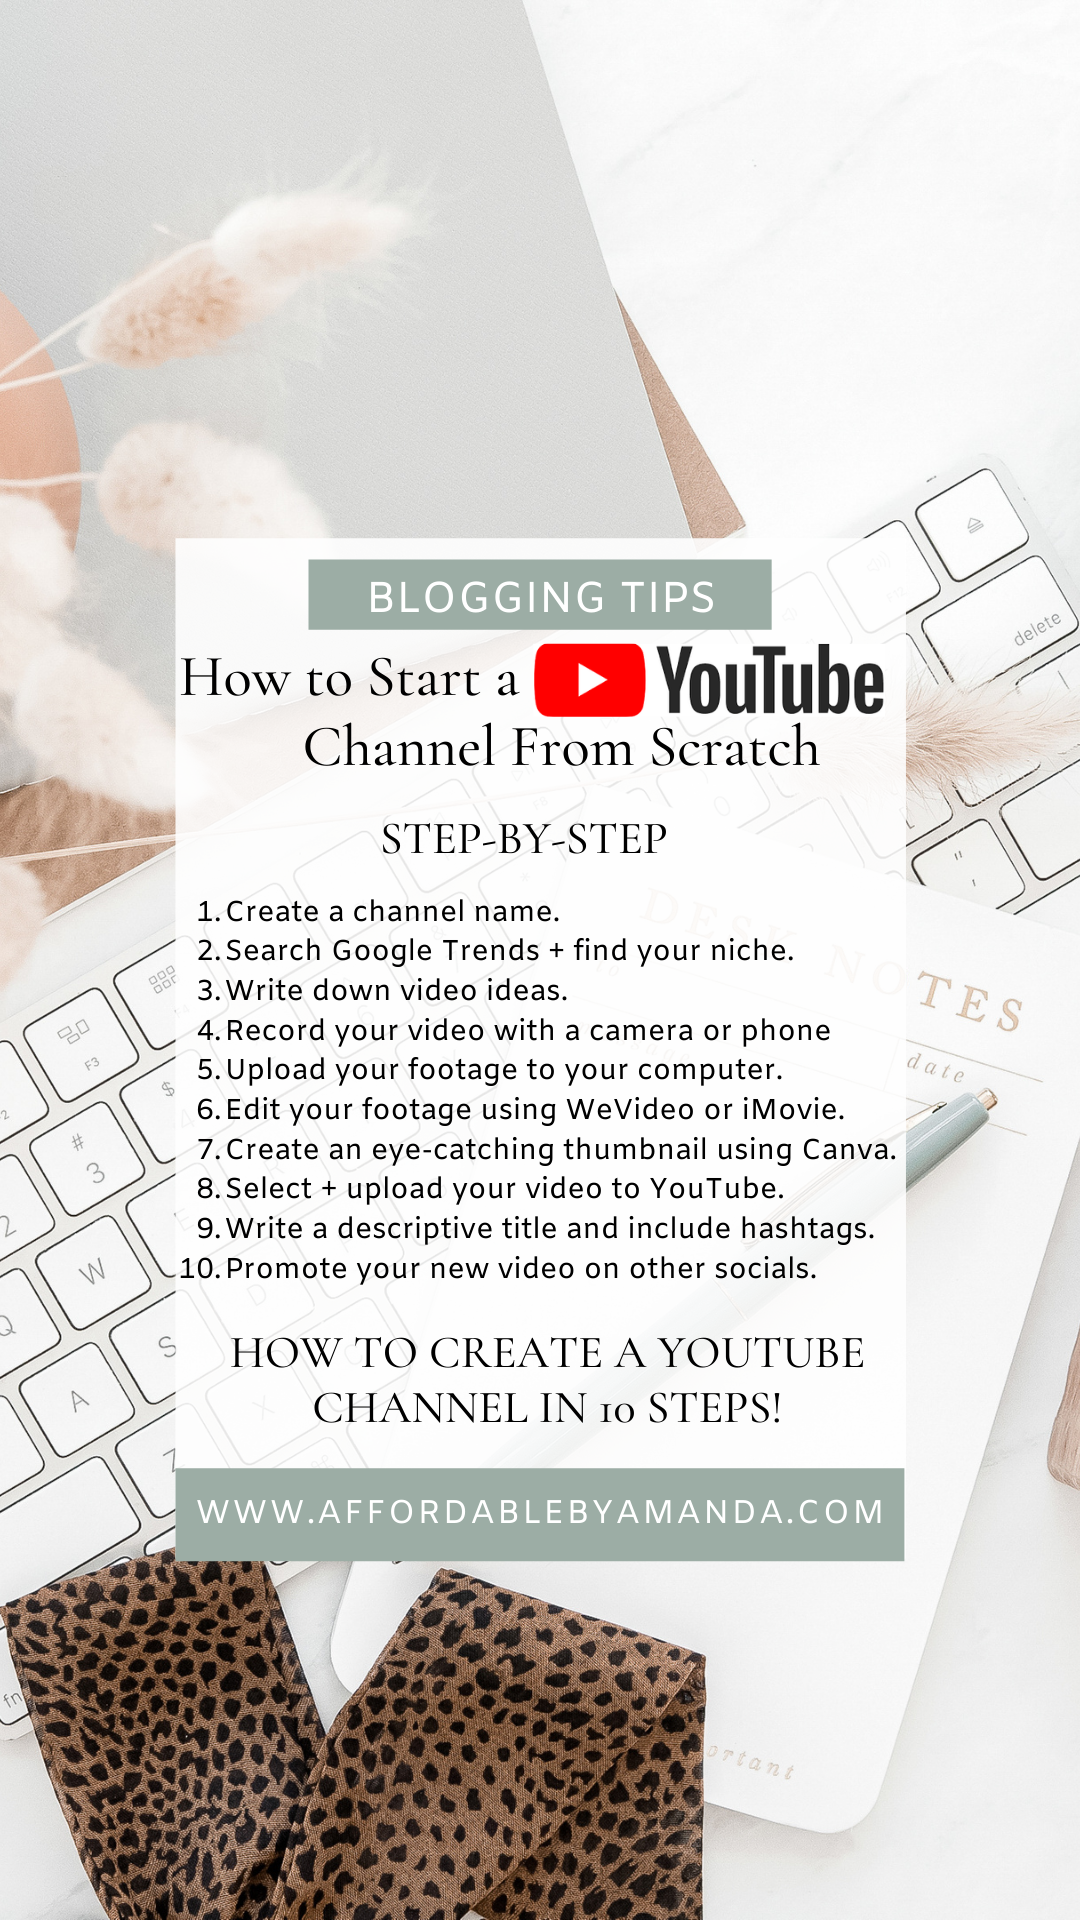 How to Start a YouTube Channel for Beginners | How to Start a YouTube Channel From Scratch in 2020 | Affordable by Amanda